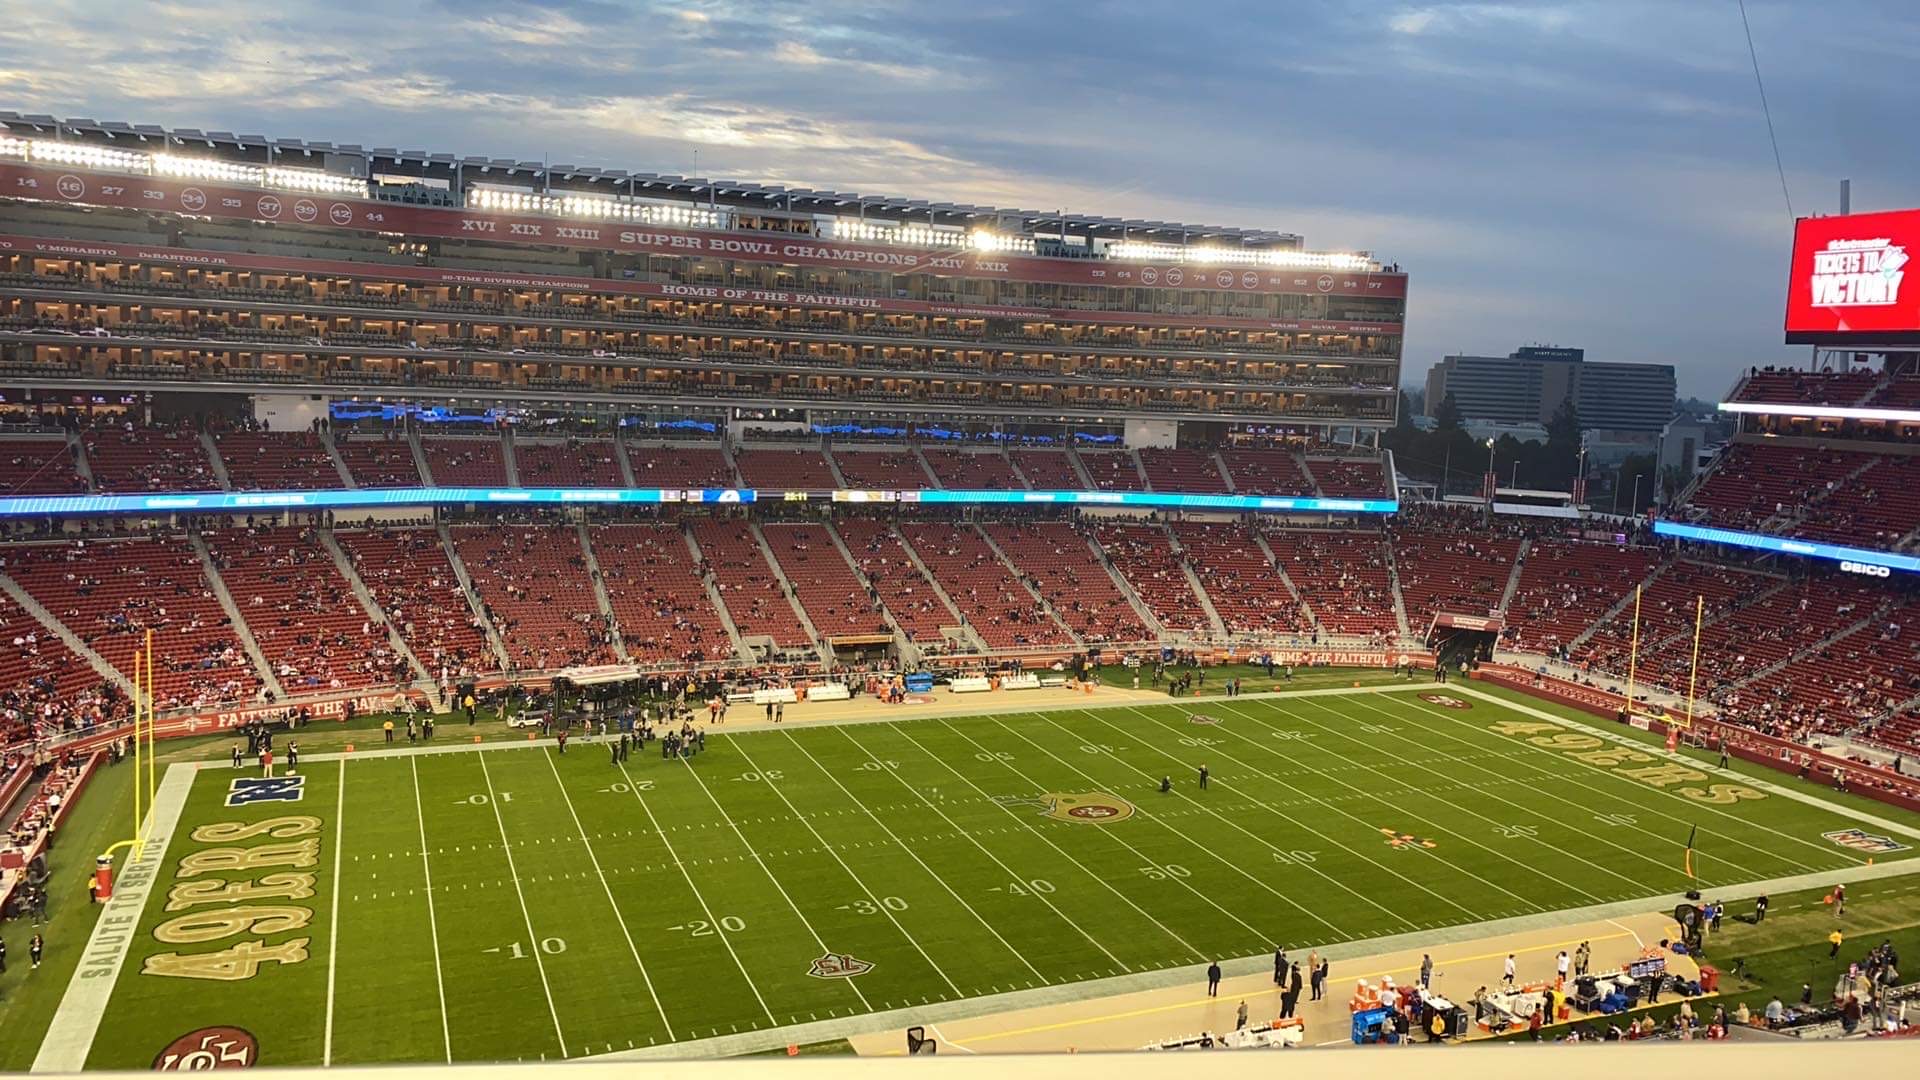 Seats Rights for 49ers Tickets for Sale